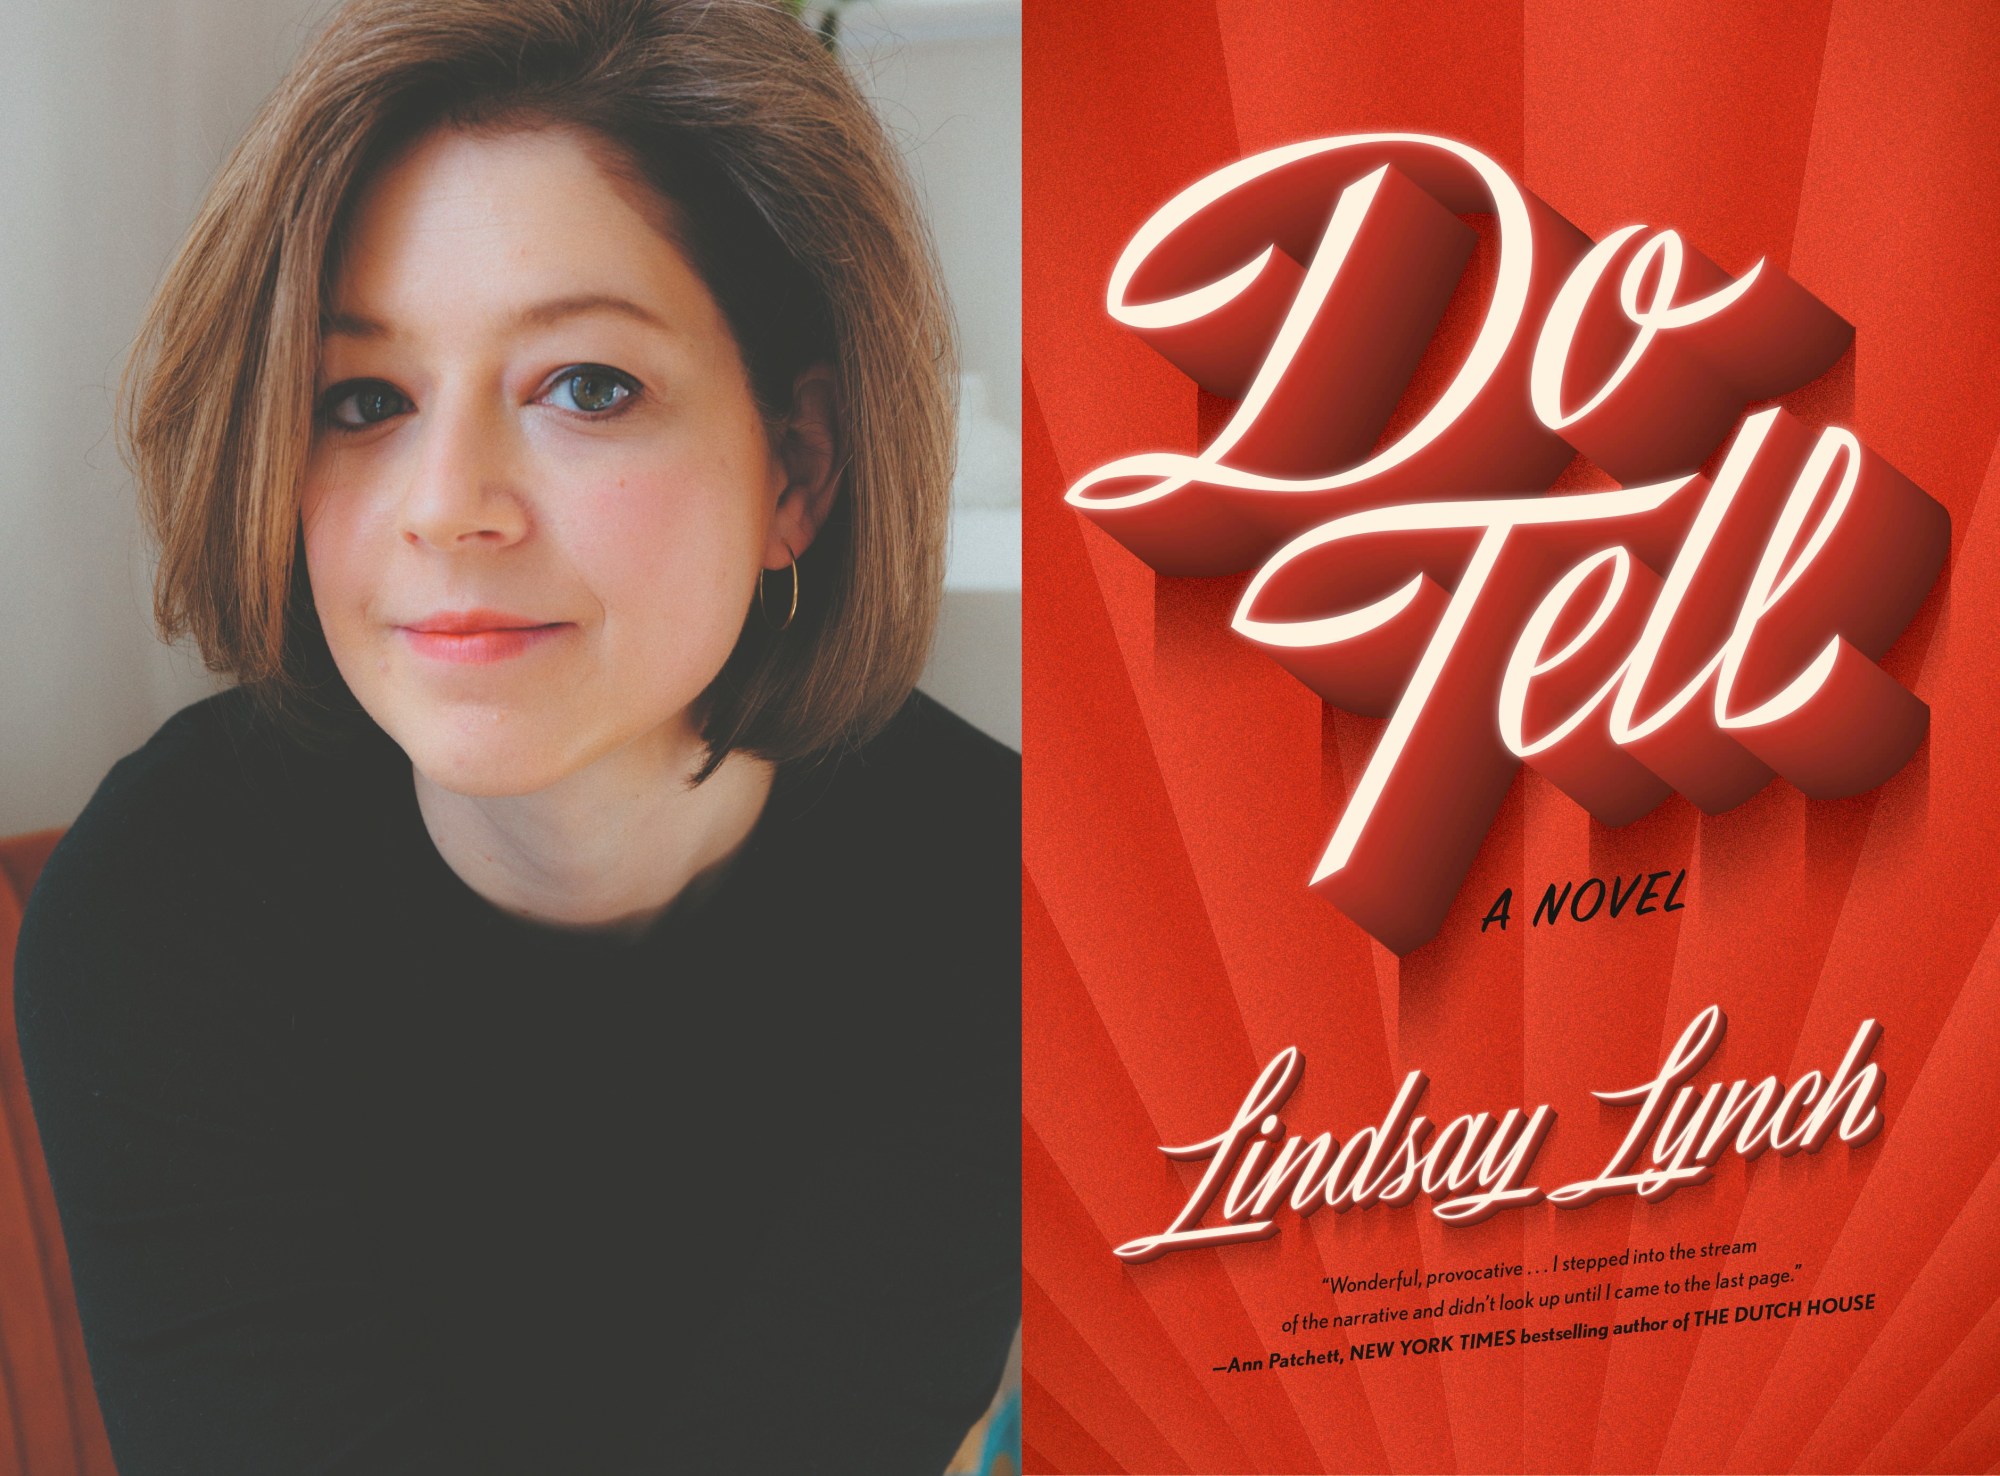 Lindsay Lynch is the author of "Do Tell." (Photo by Heidi Ross / Courtesy of Doubleday)